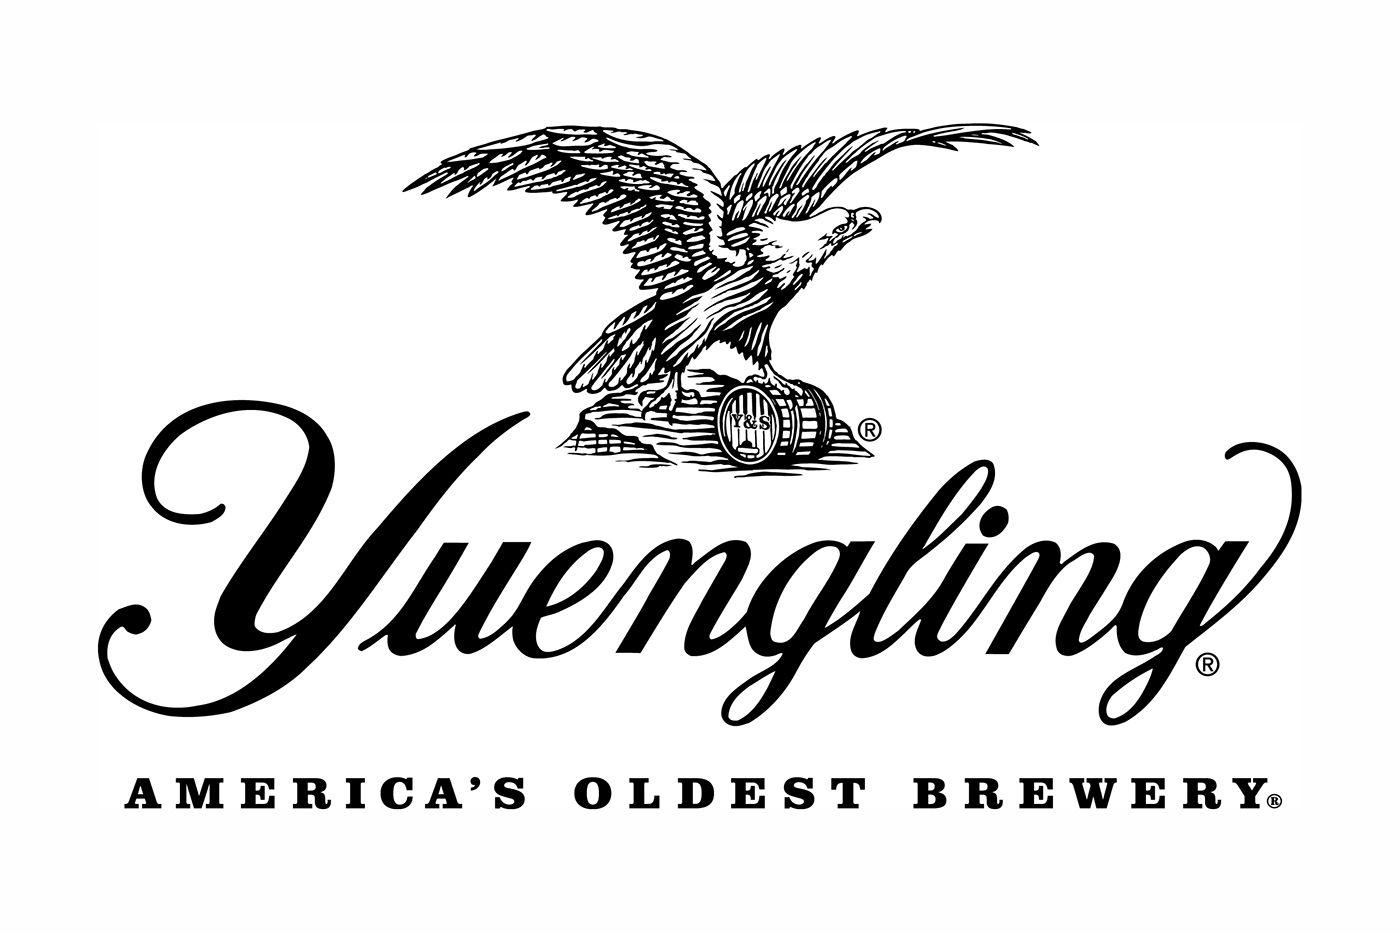 Yuengling Logo - Yuengling Brewery Logomark Illustrated by Steven Noble on Behance